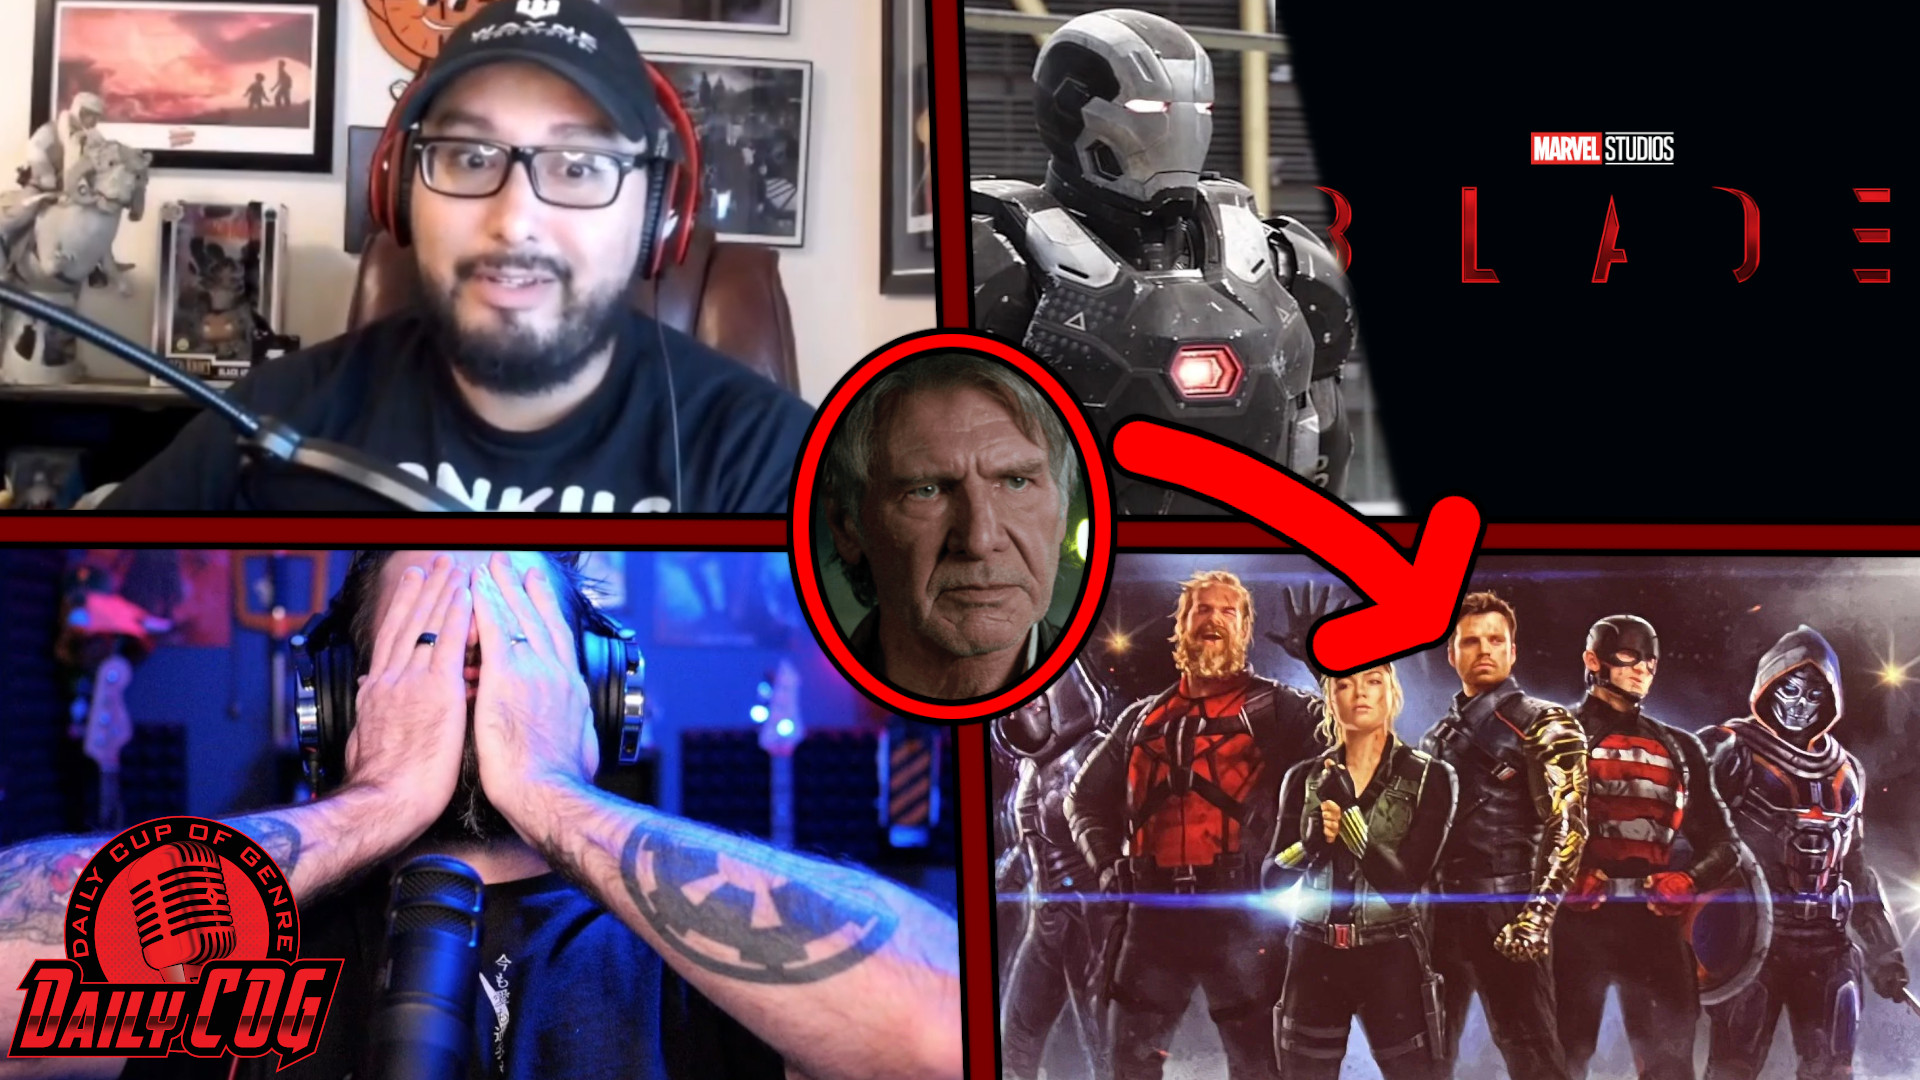 CRAZY MCU News! Blade, Armor Wars Shake-Up & Harrison Ford For Thunderbolts? | Daily COG